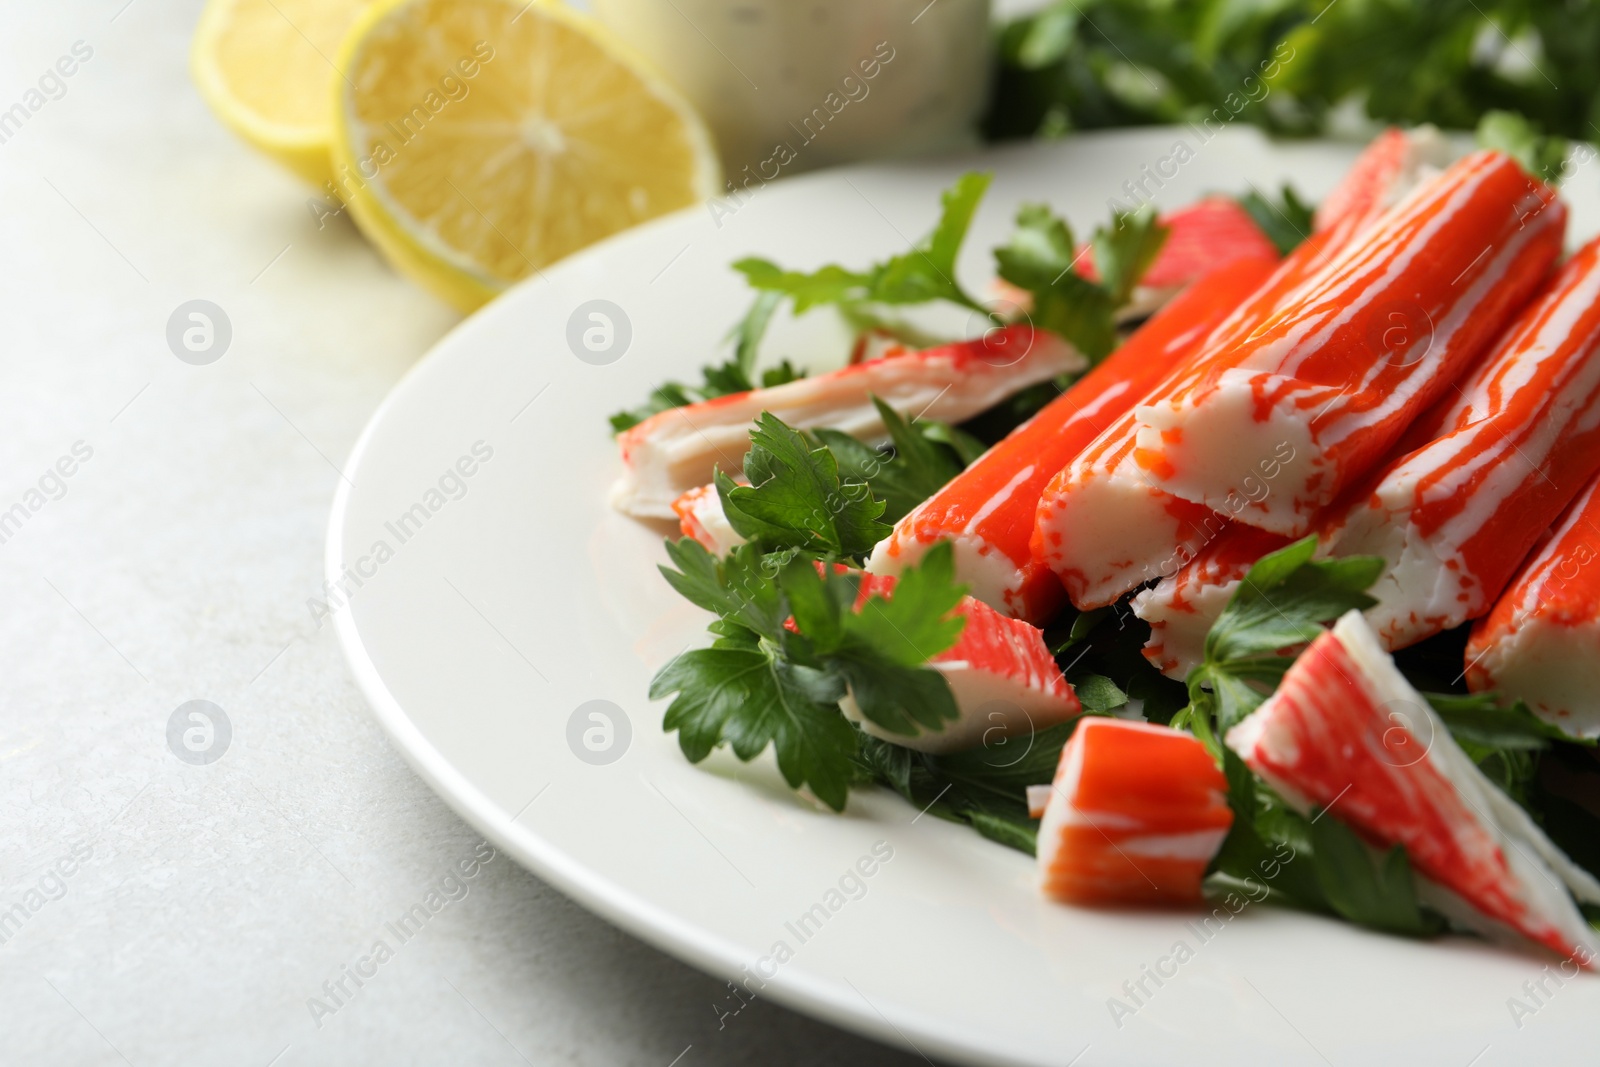 Photo of Crab sticks and parsley on light table, closeup